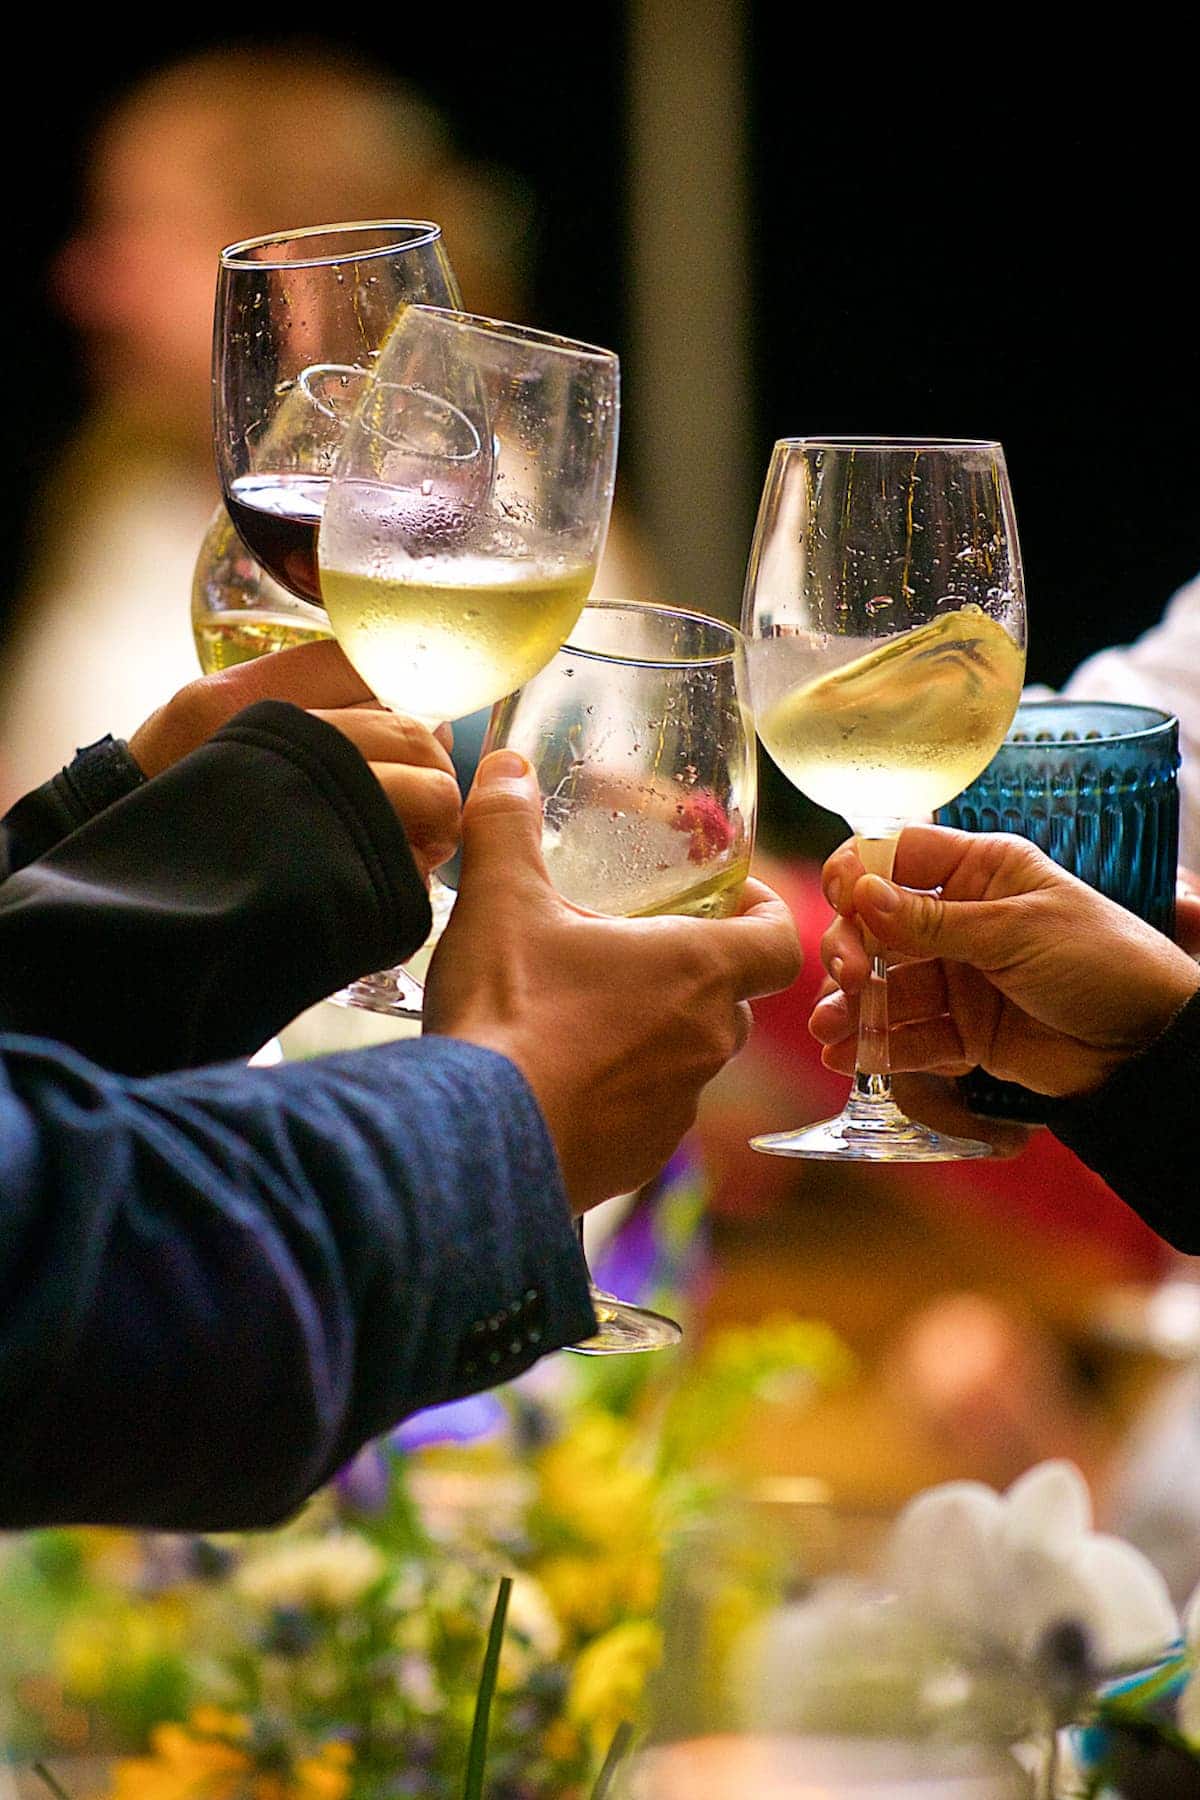 an image of people toasting with wine glasses.